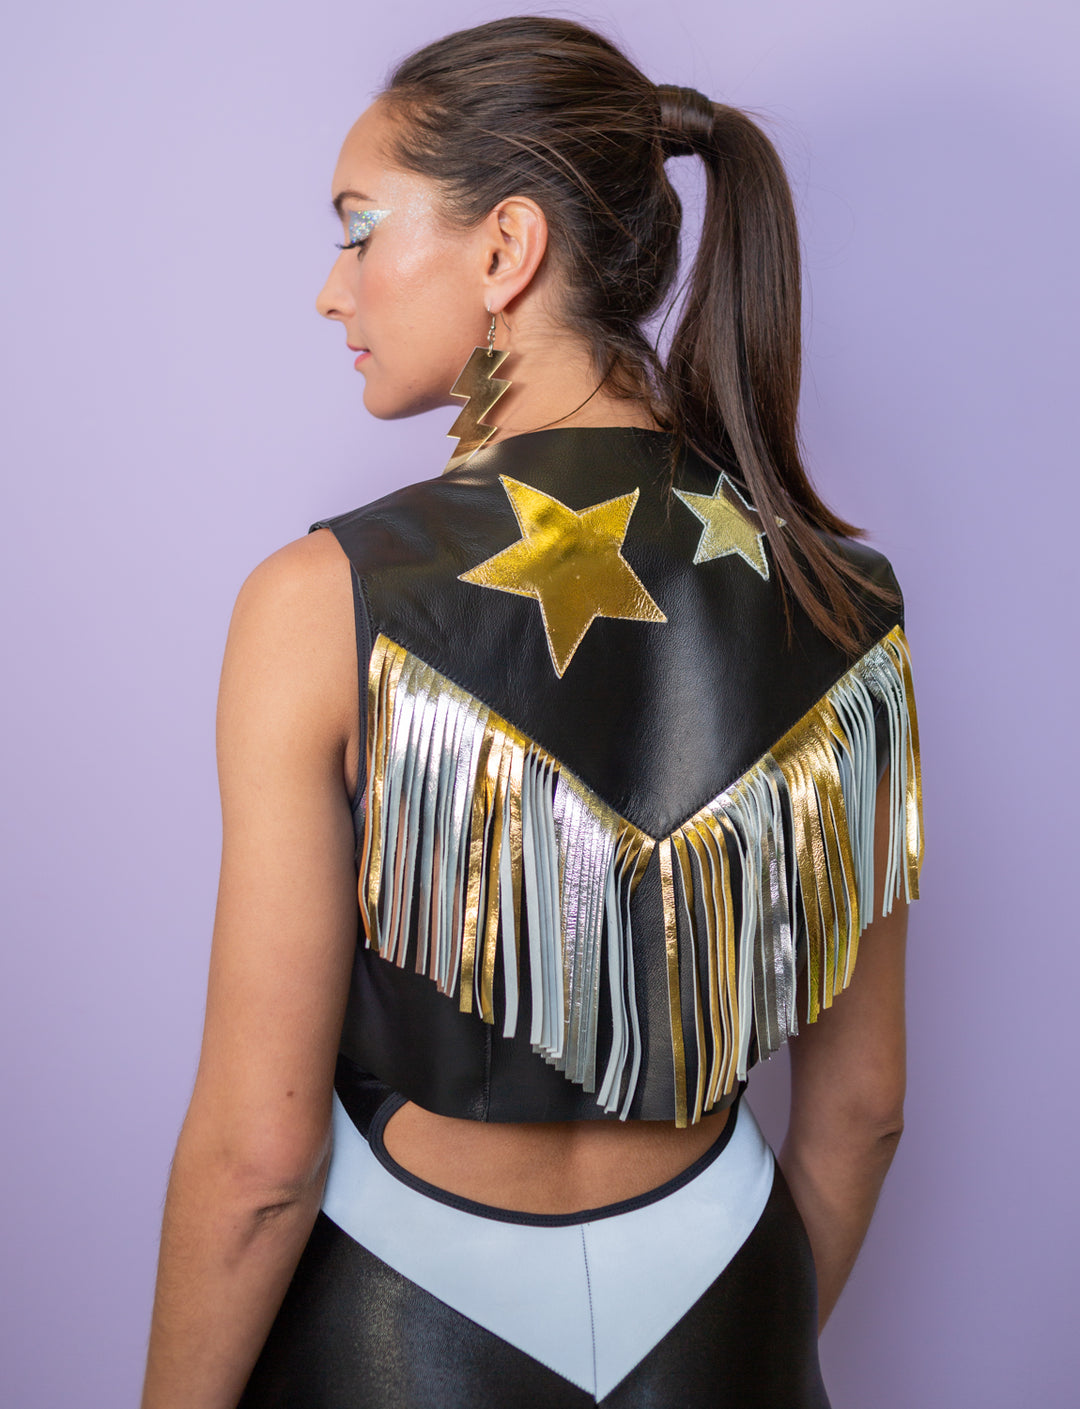 Woman wearing a black leather waistcoat with gold and silver tassels and appliqued stars